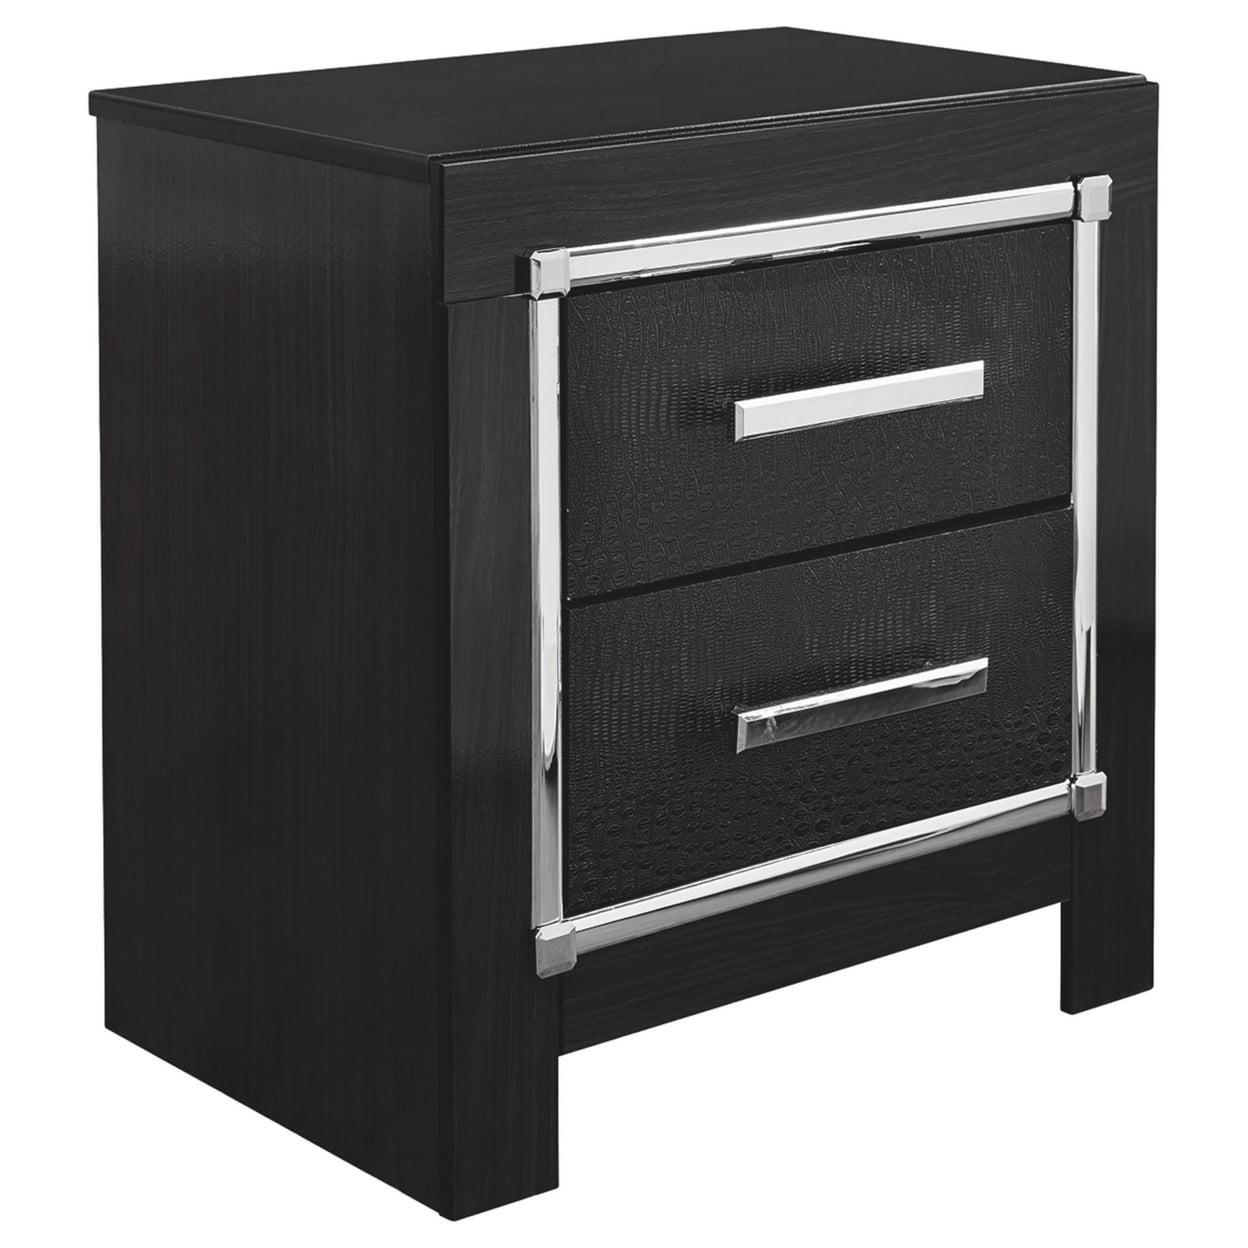 Contemporary Black 24" Nightstand with Chrome Metal Trim and USB Charging